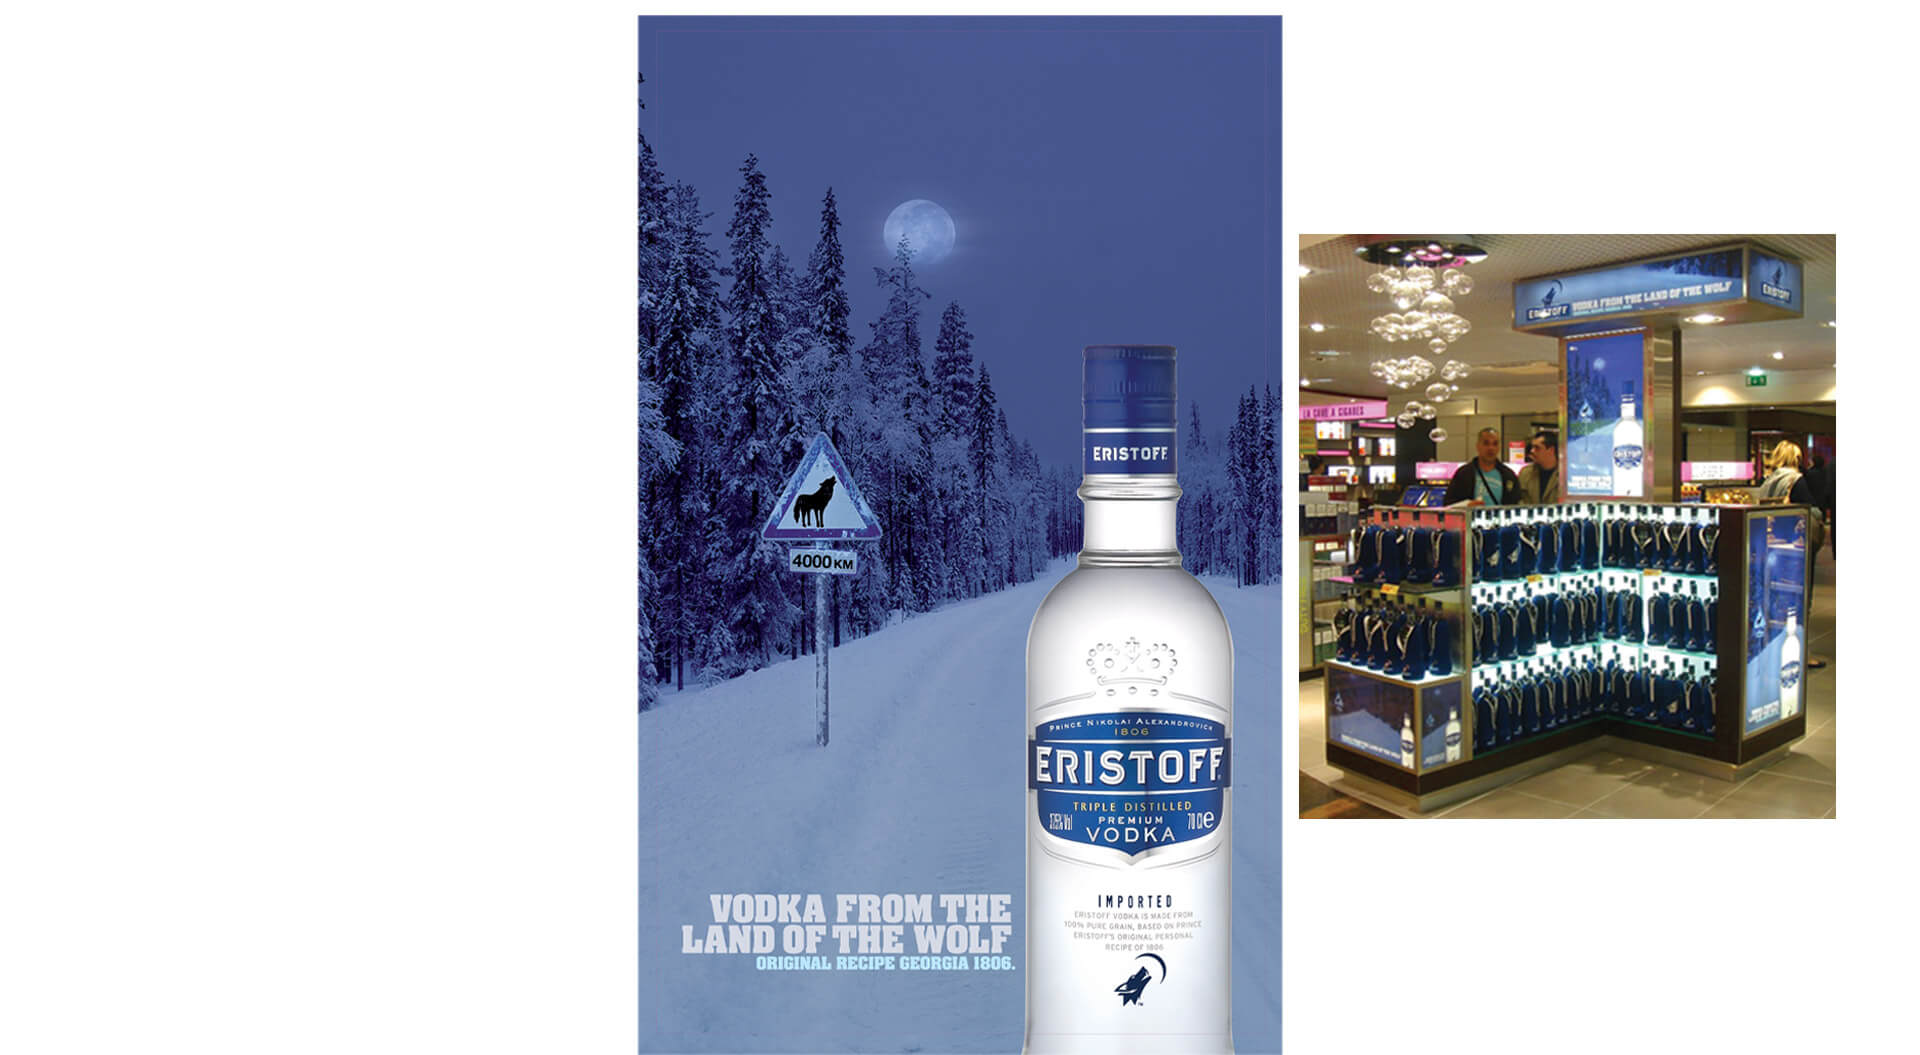 Eristoff vodka brand promotions Vodka from the land of the wolf and airport duty free merchandising display